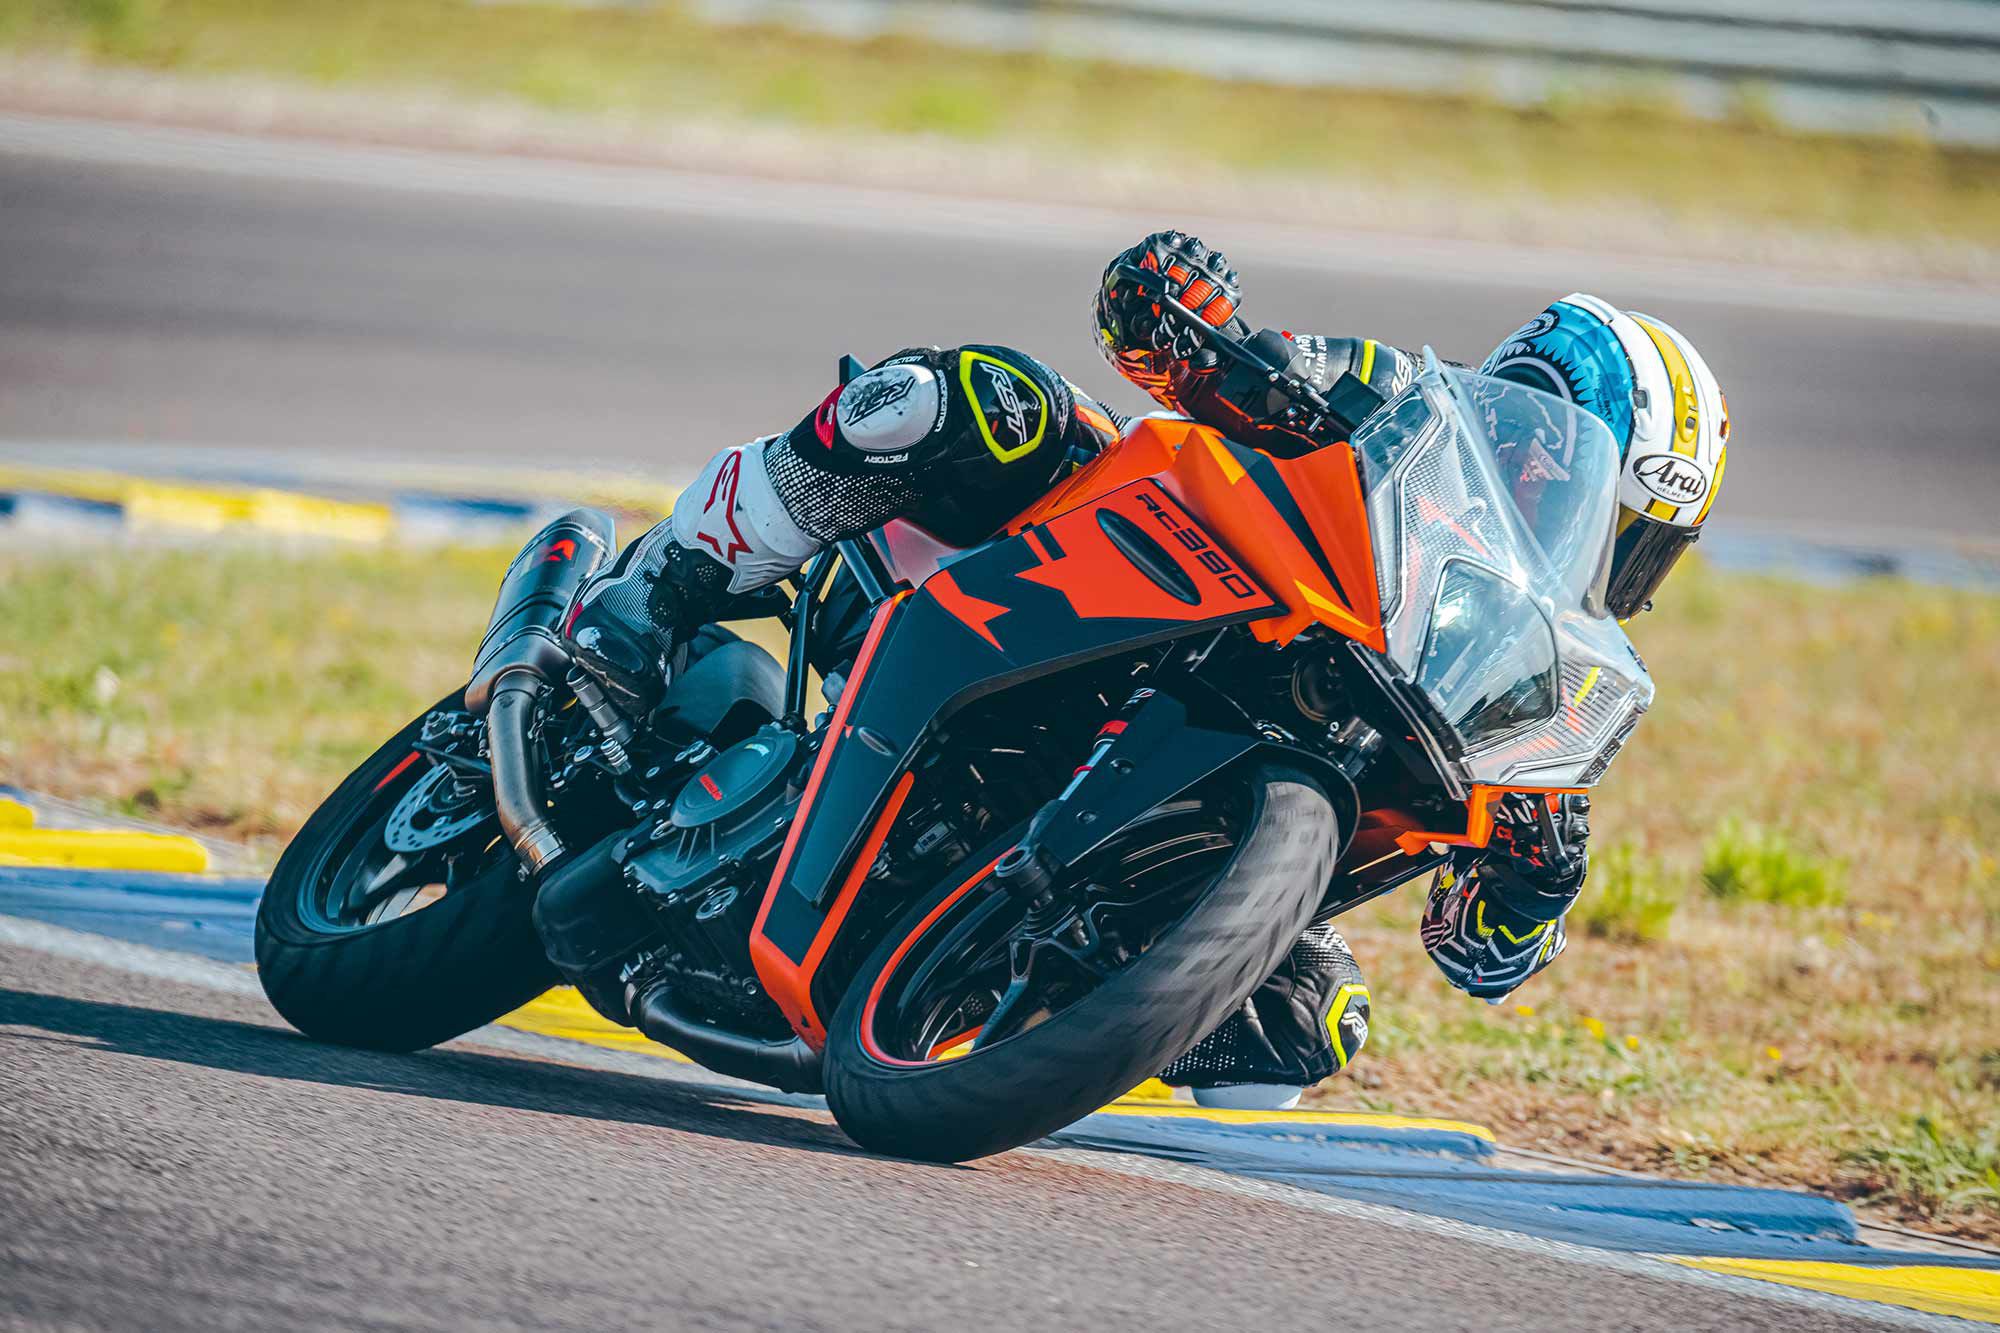 On the track part of this test, KTM fitted the optional Akrapovič muffler, which added a little more pep, but in Euro 5 road trim it’s a little deflating.